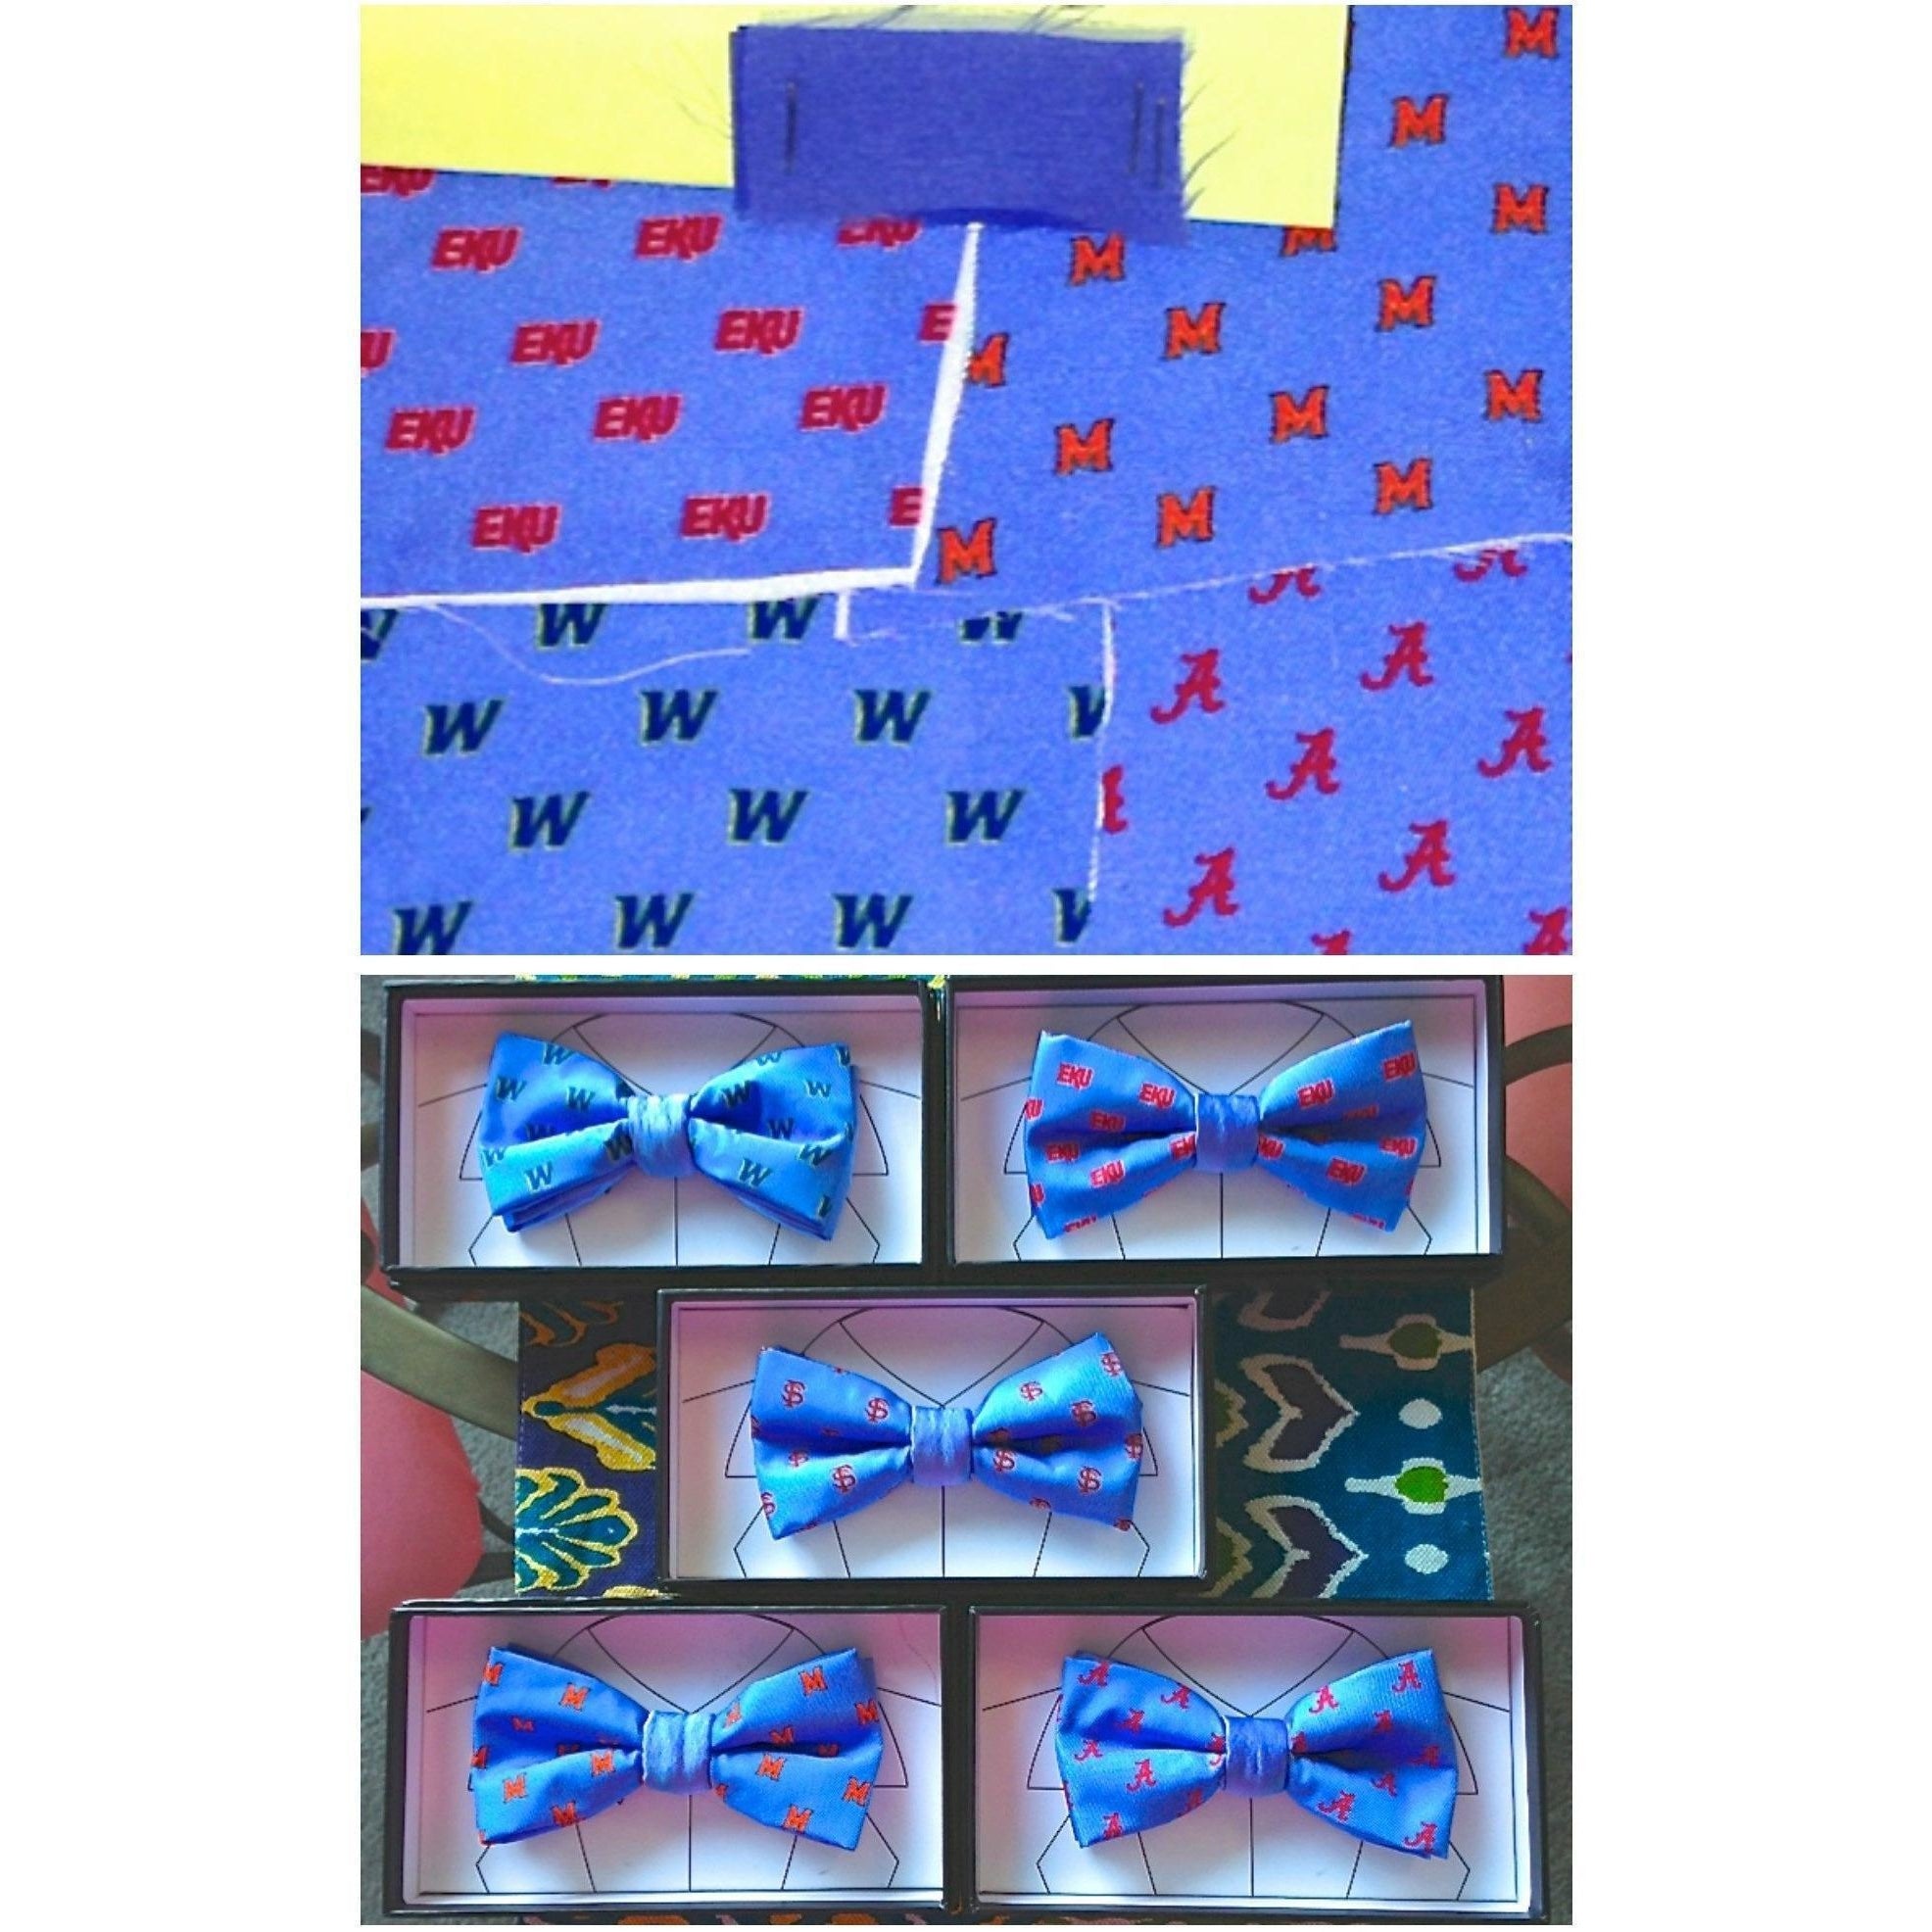 1 Design Your Junior's Tie - for personal gifts, matching